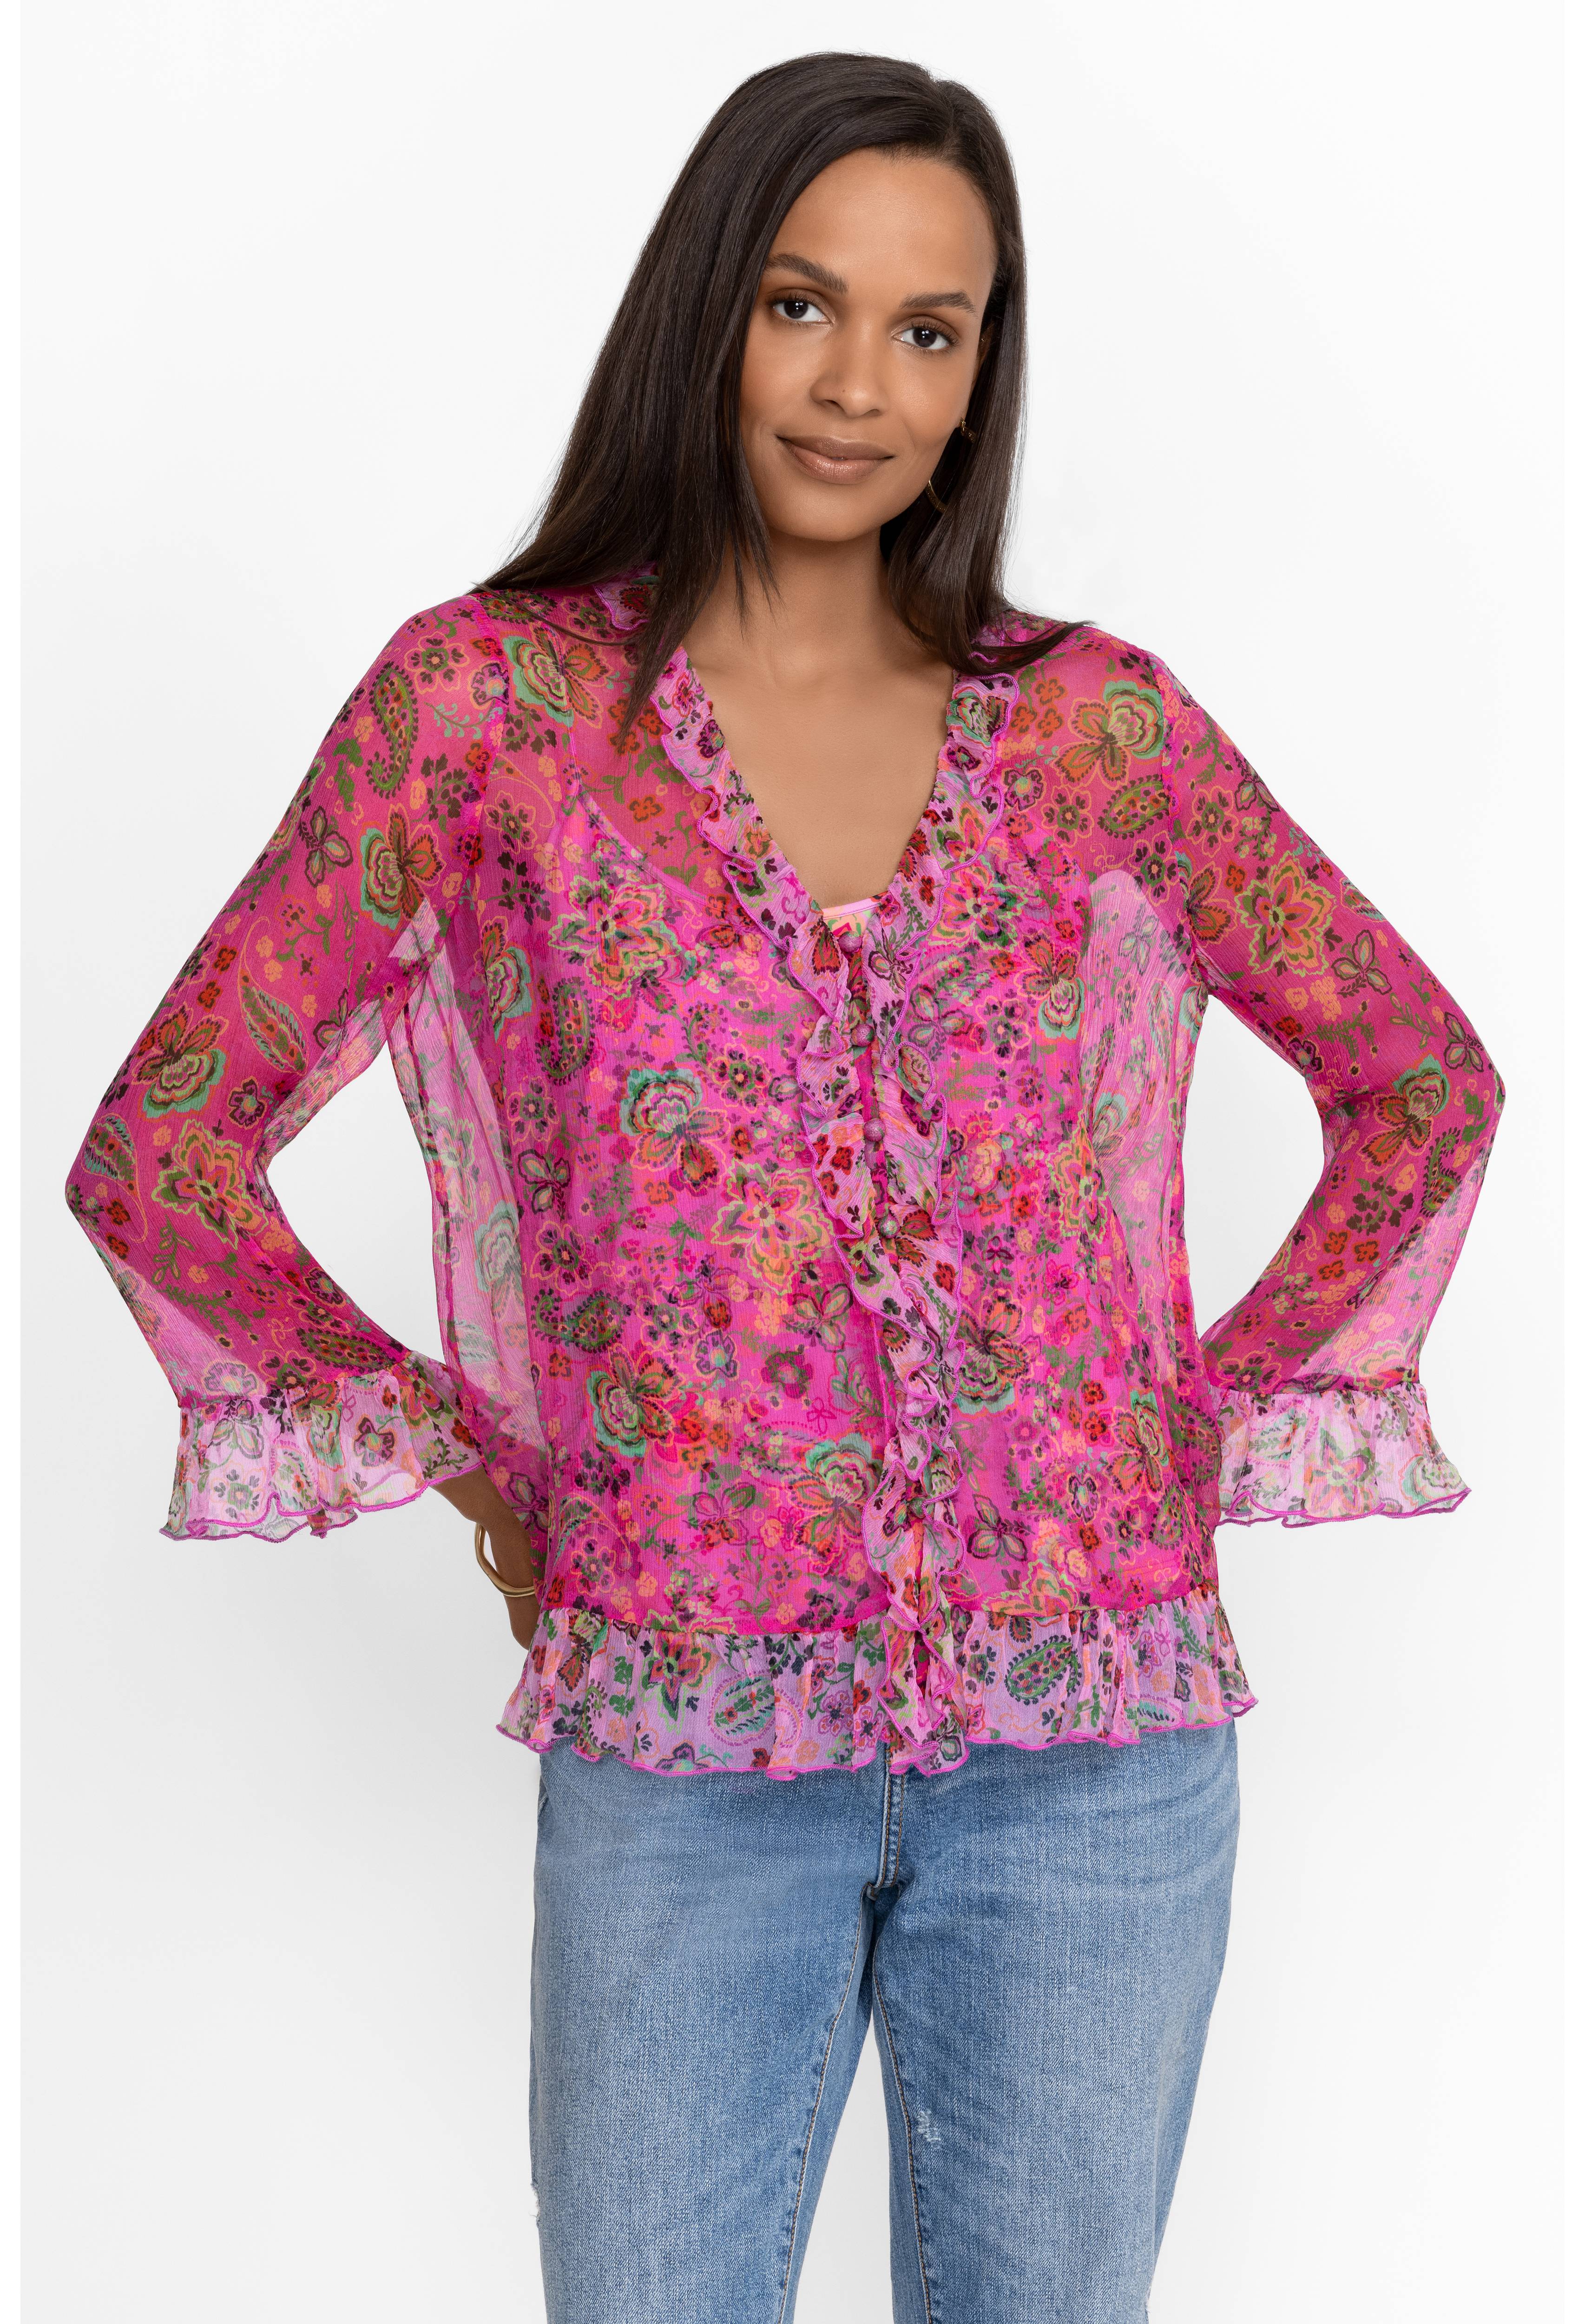 Foxglove Silk Blouse, , large image number 3